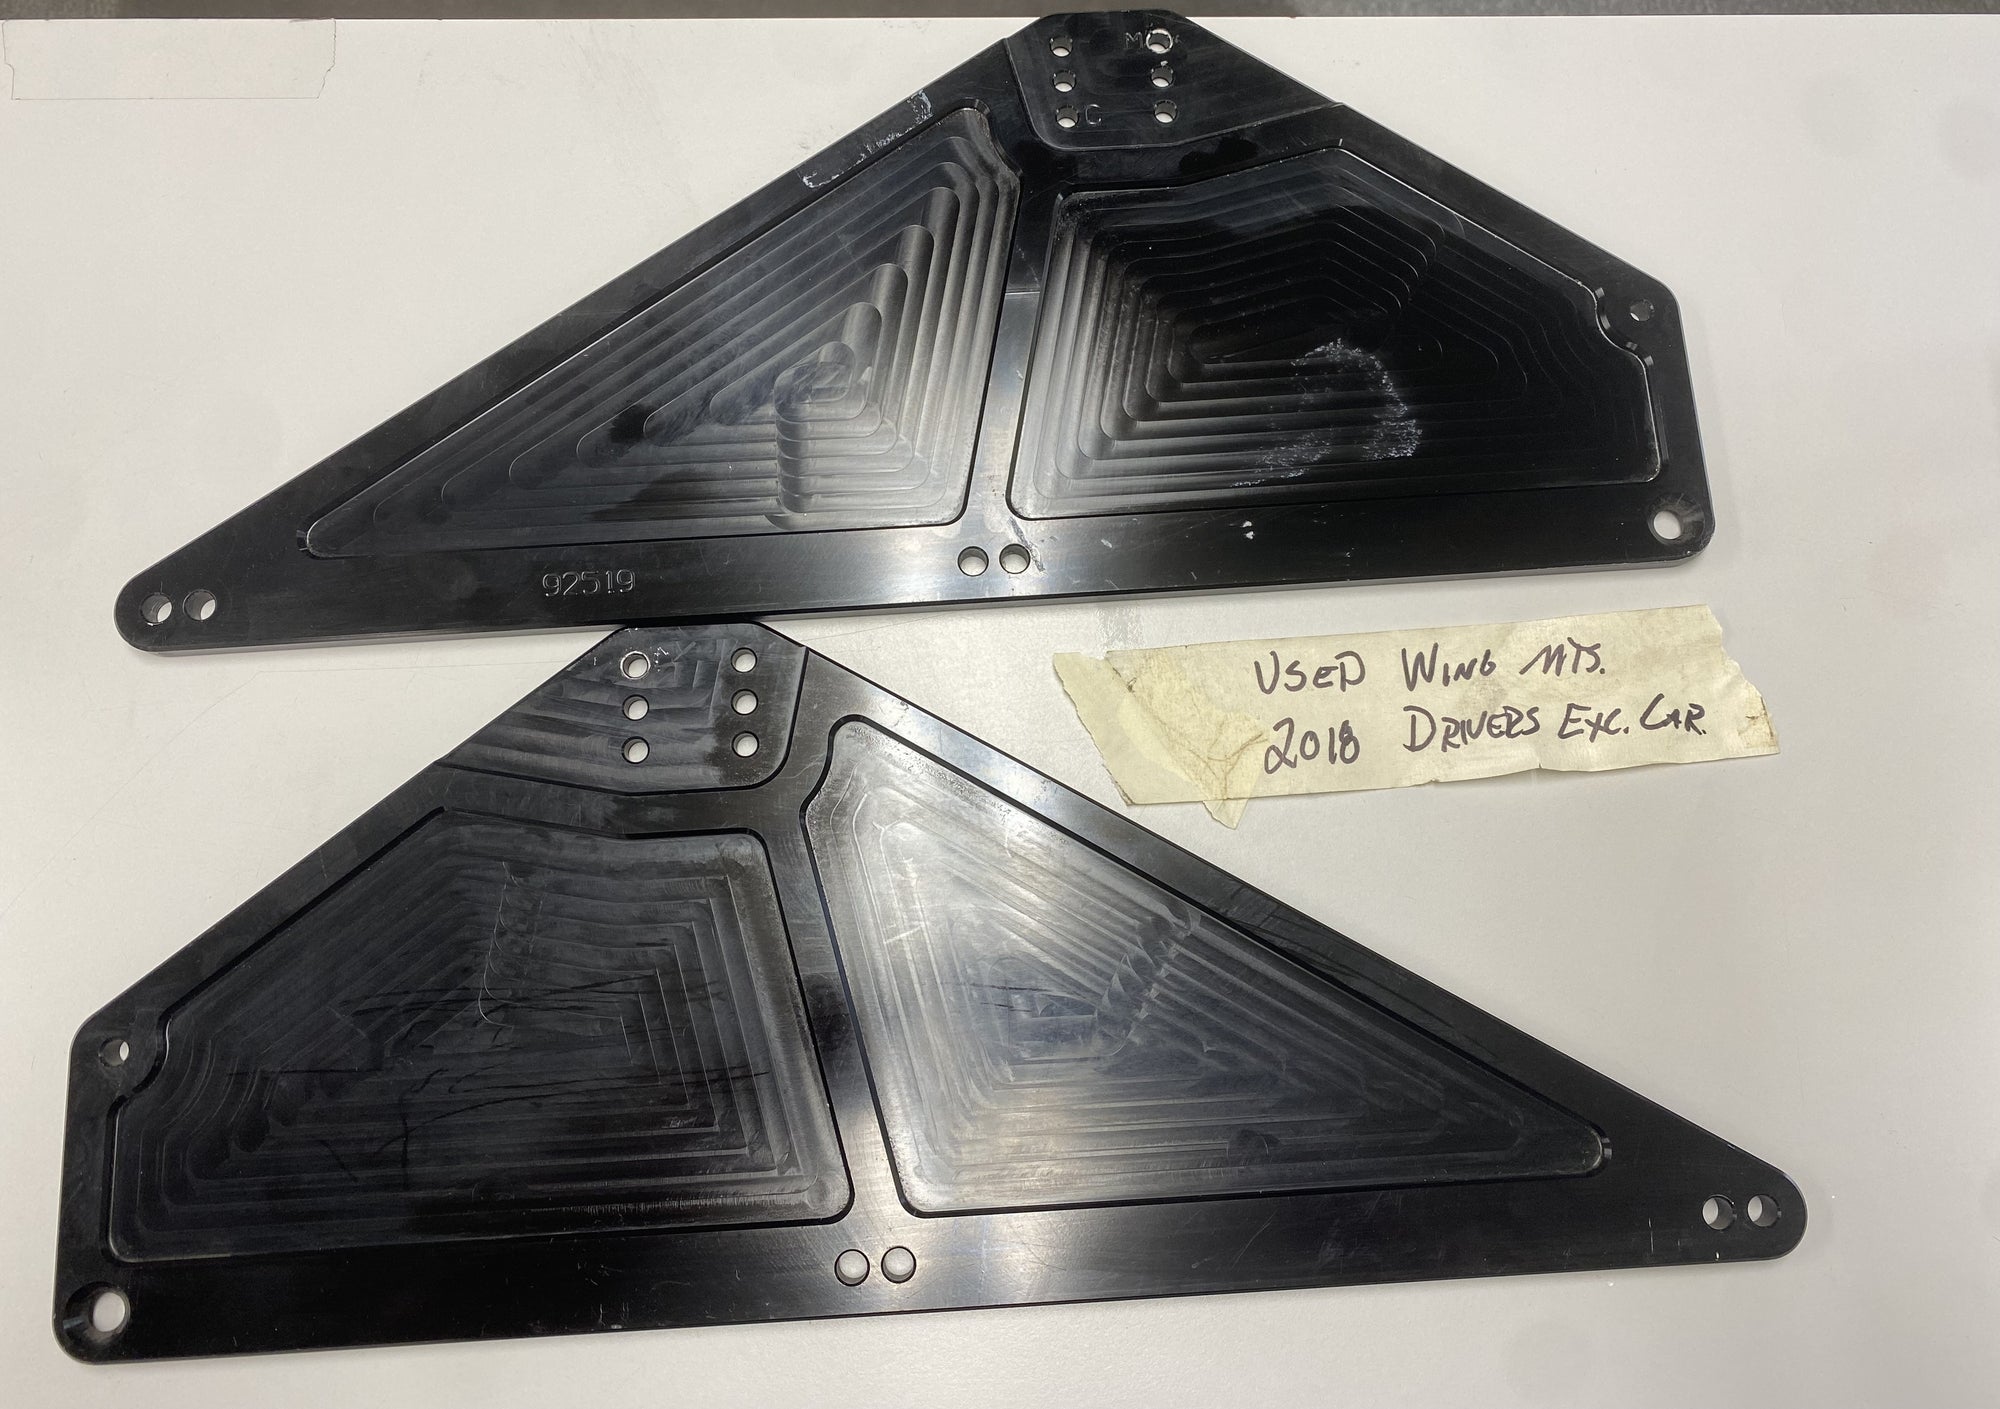 USED WING MOUNTS